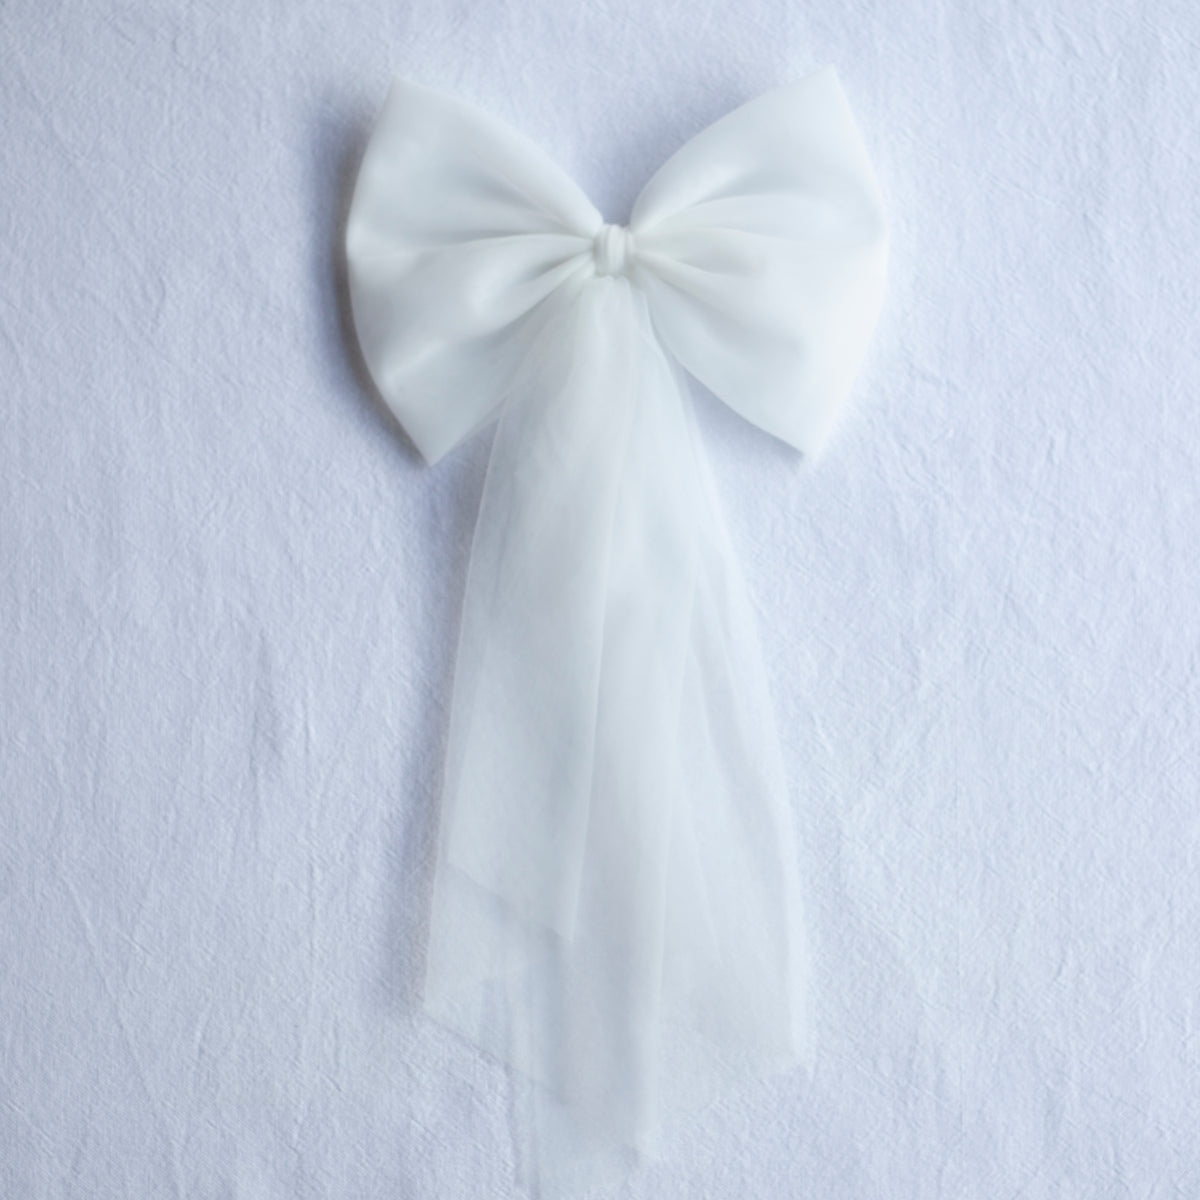 Large tulle bow clip in ivory with long tulle tails. Perfect to match a flower girl dress or girls party dress.